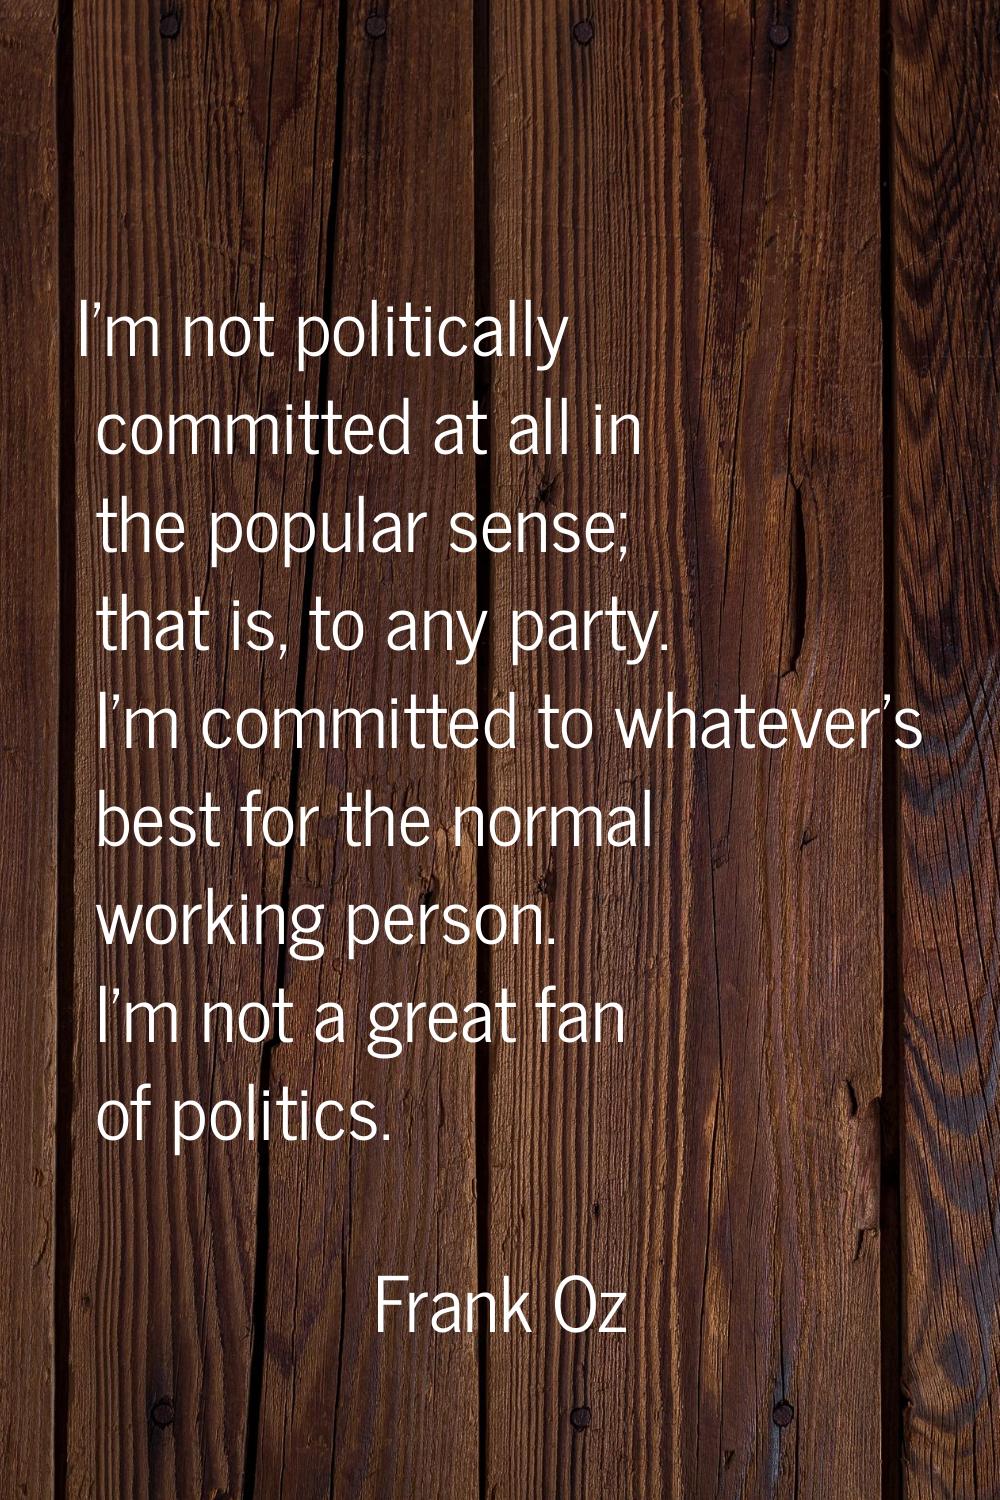 I'm not politically committed at all in the popular sense; that is, to any party. I'm committed to 